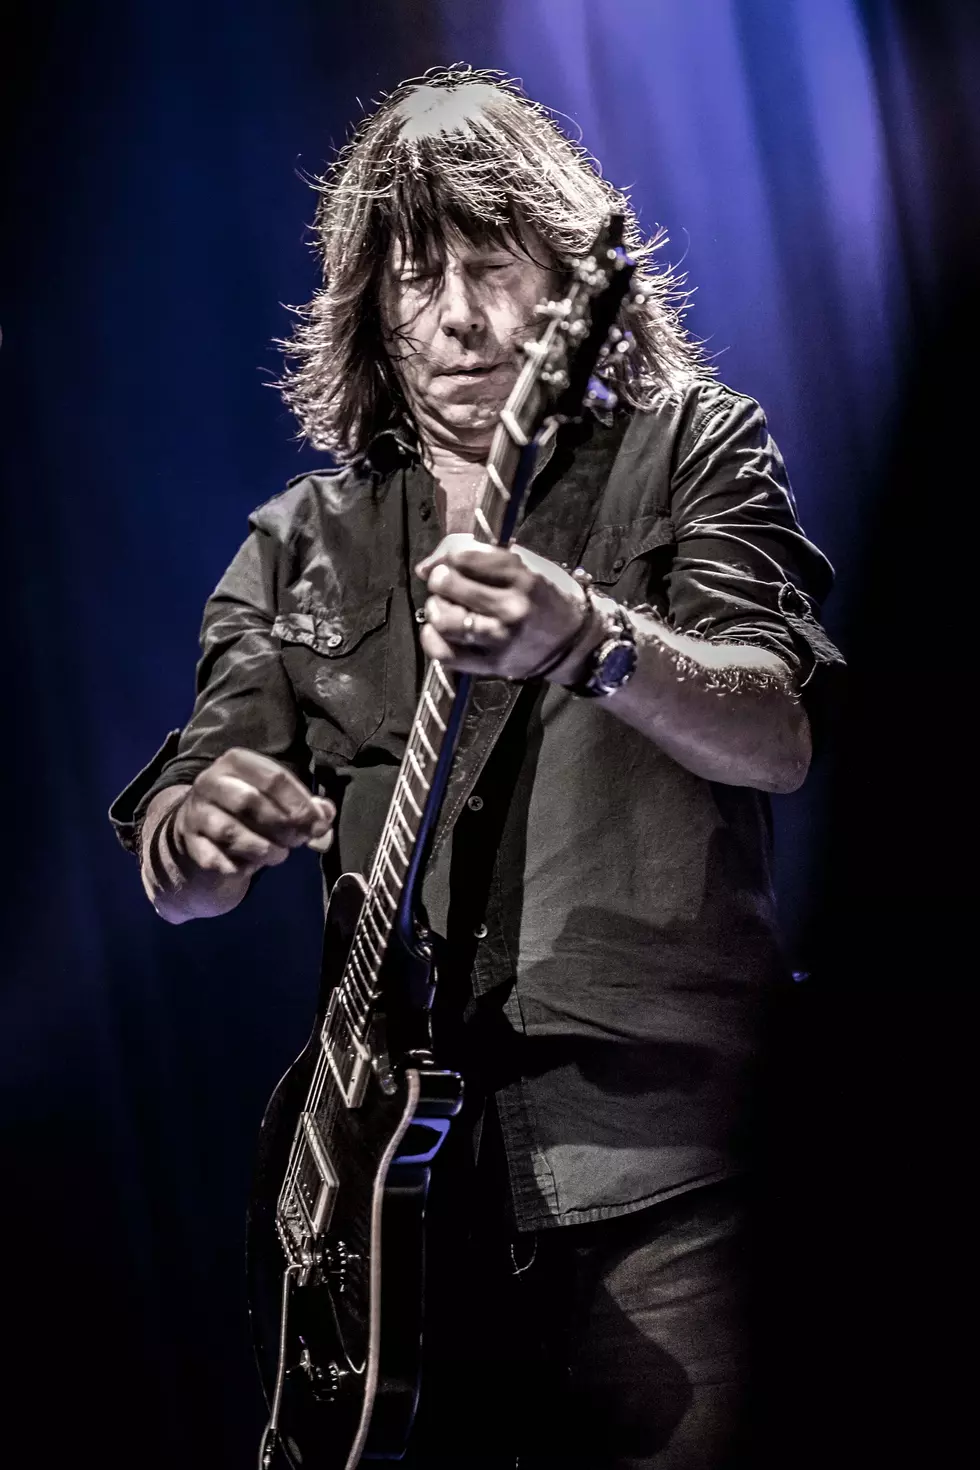 In Conversation: Behka Talks With Pat Travers Band Legend [INTERVIEW]